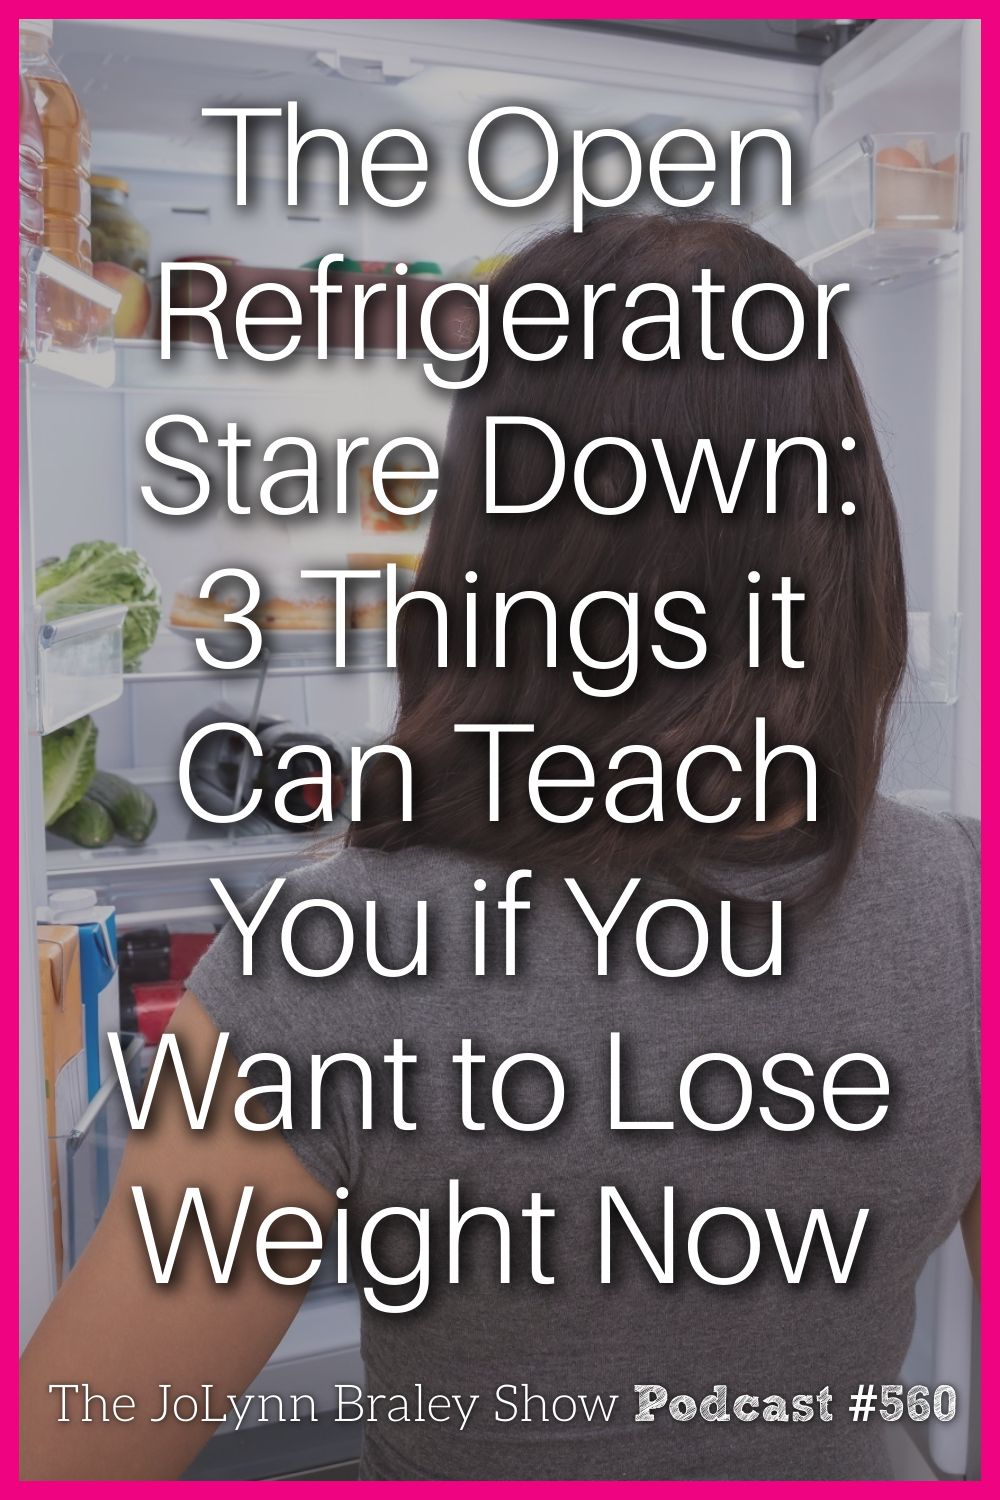 The Open Refrigerator Stare Down: 3 Things You can Learn if you want to Lose Weight Now [Podcast #560]